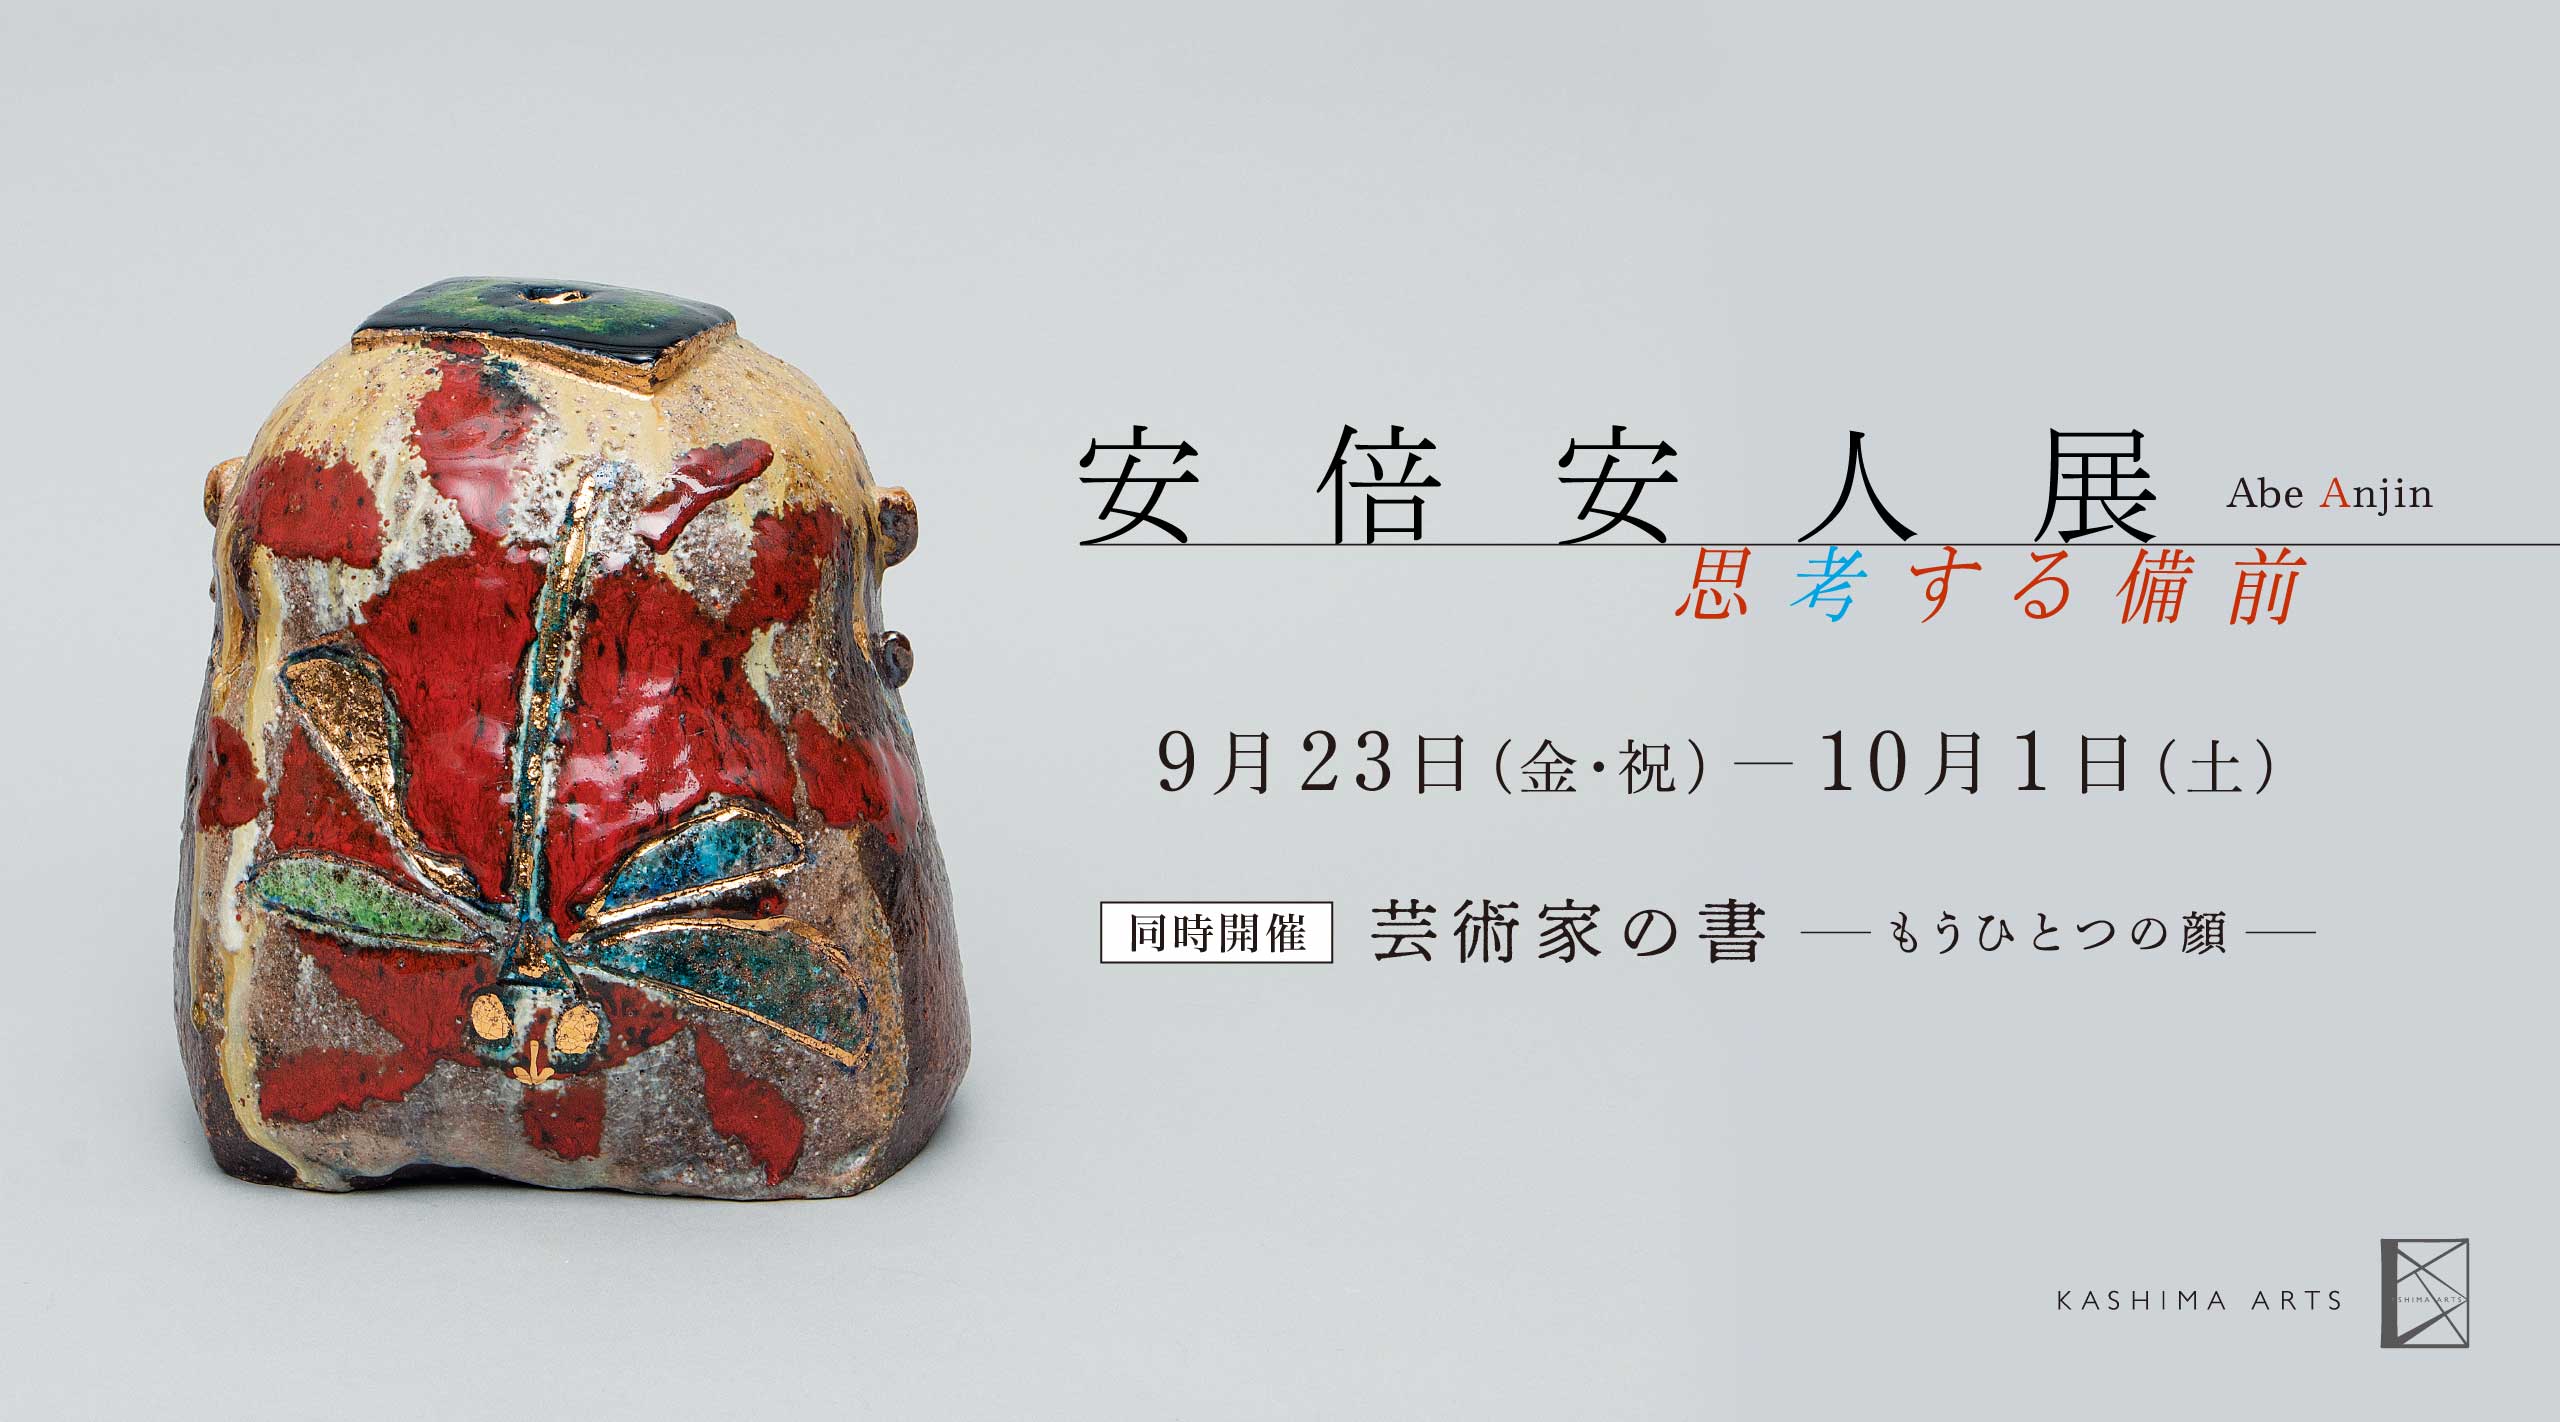 Abe Anjin Exhibition: Thinking Bizen / Calligraphy by Artists: Another Face